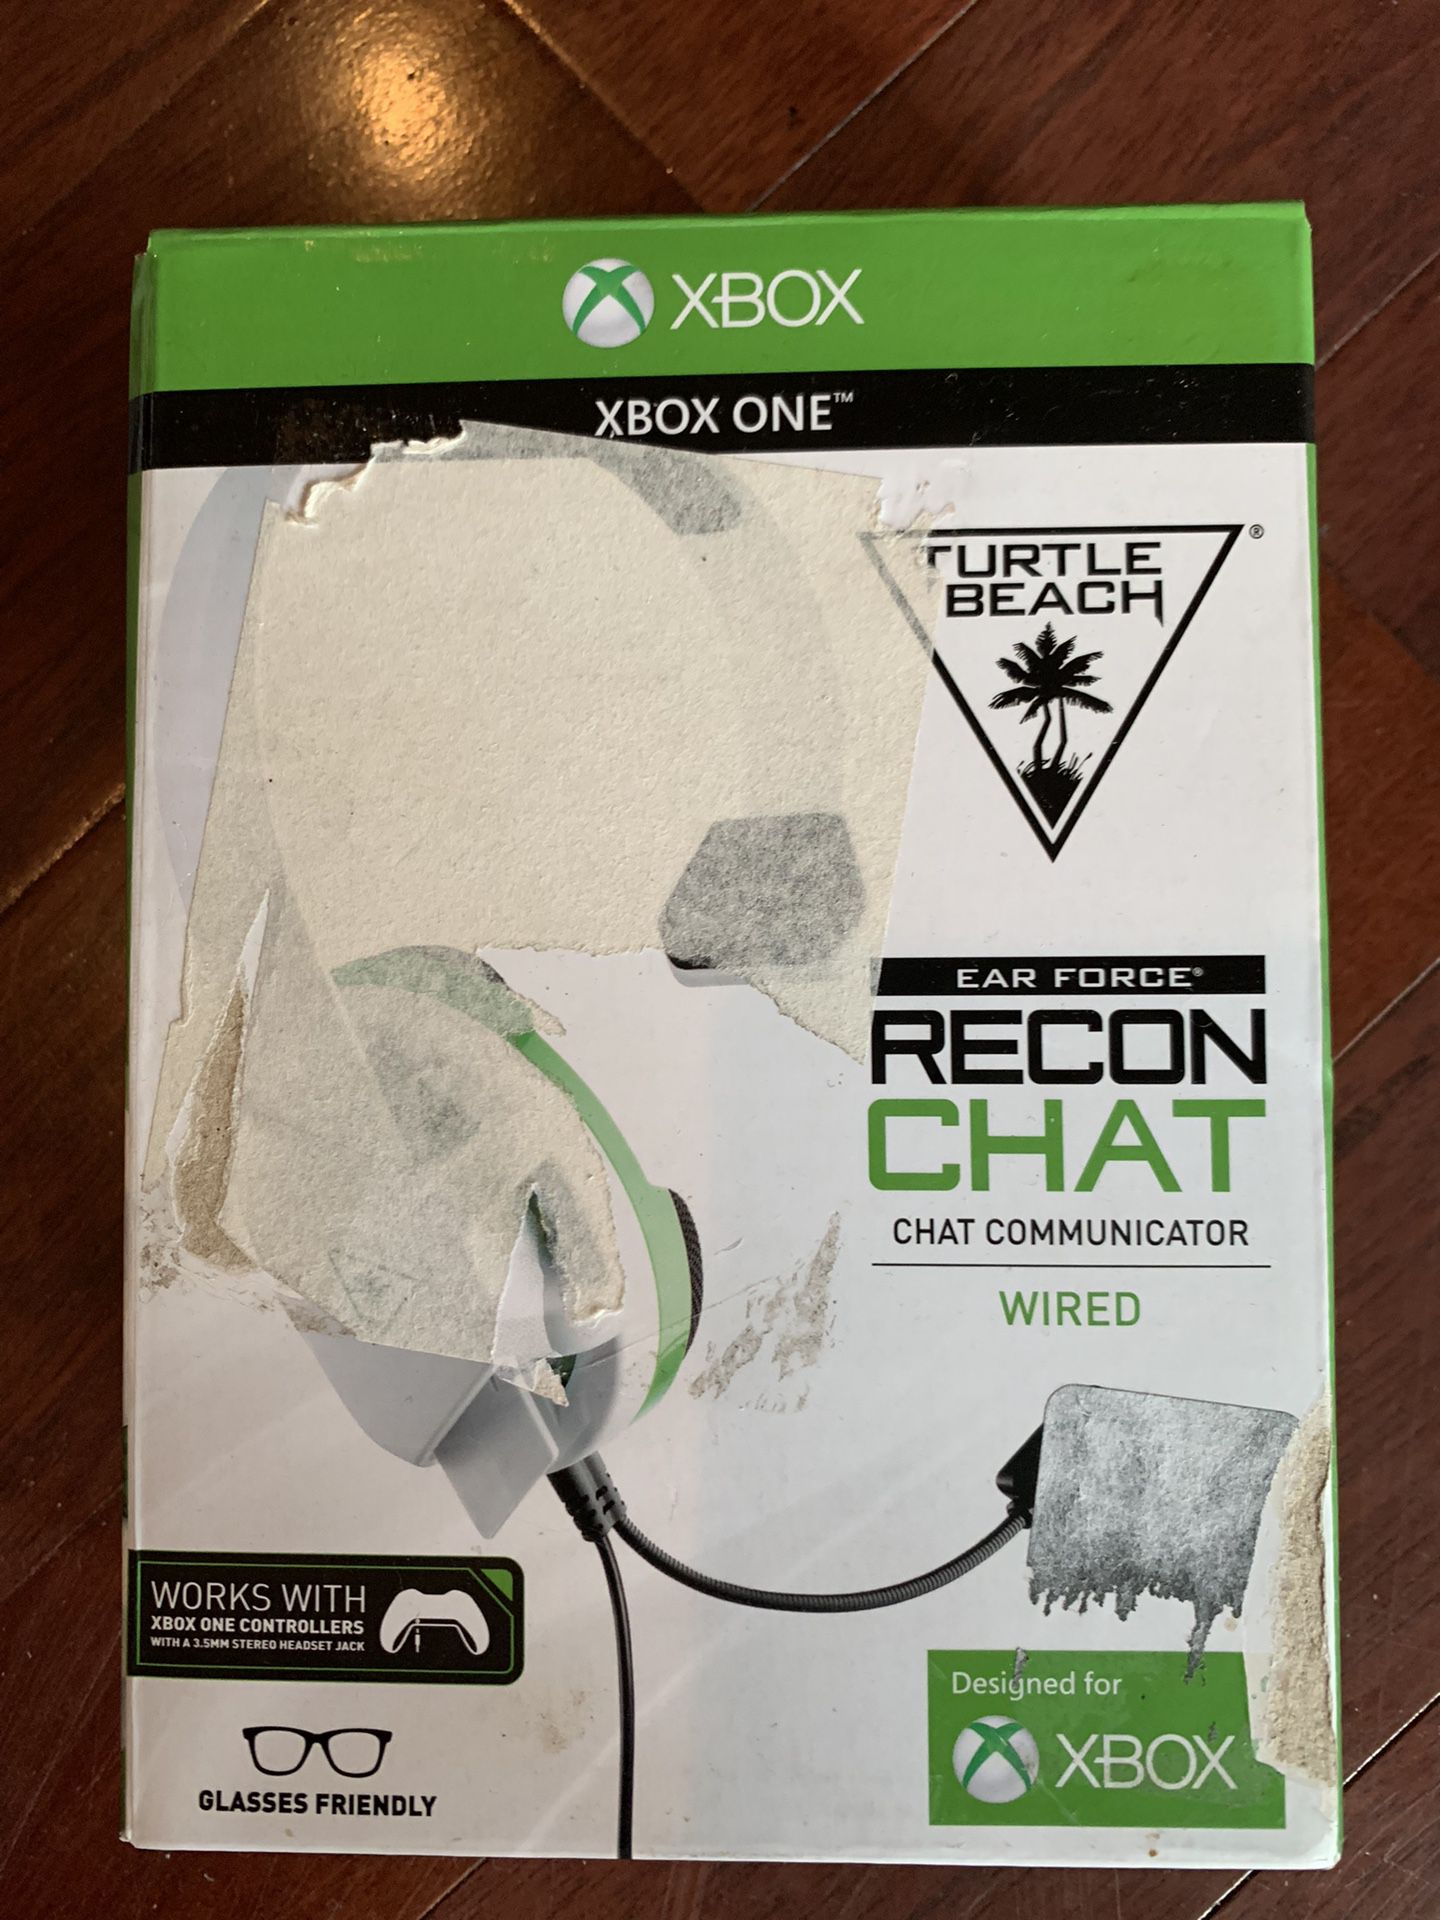 Xbox One Recon Chat Headset by Turtle Beach, white/green, new in beat up box